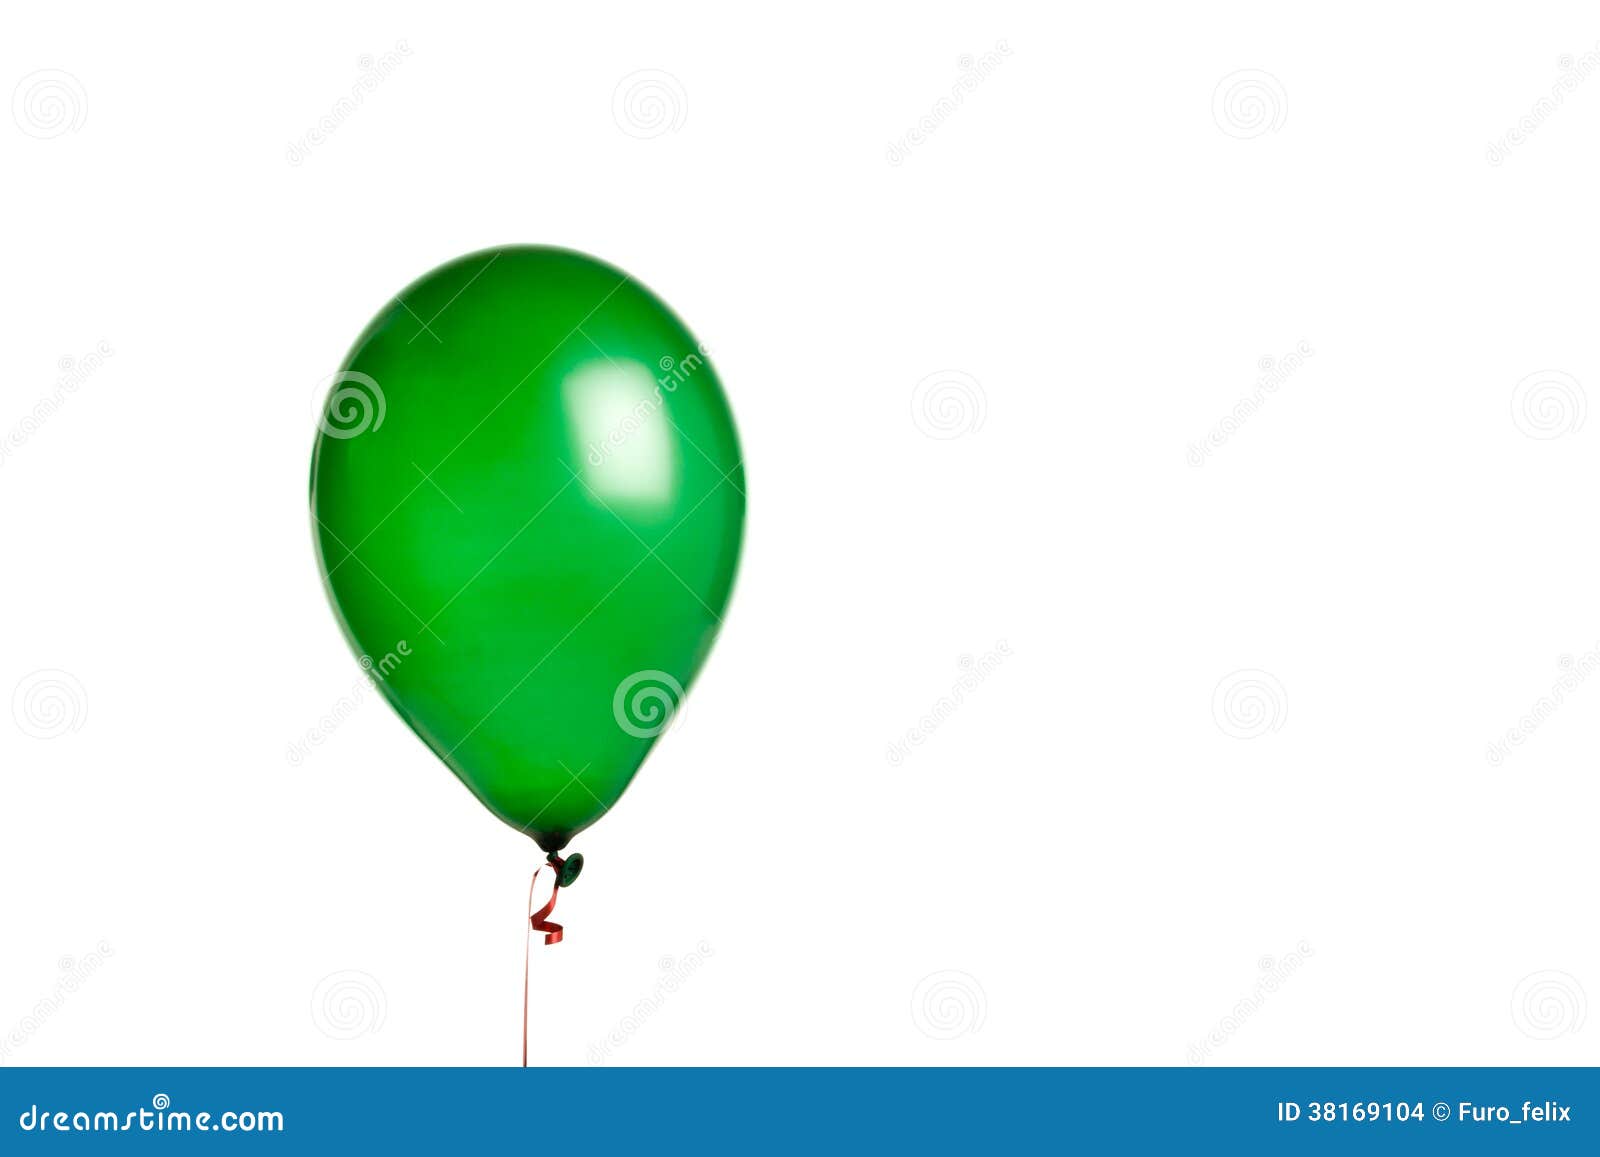 Green Balloon Strings: Over 5,779 Royalty-Free Licensable Stock  Illustrations & Drawings